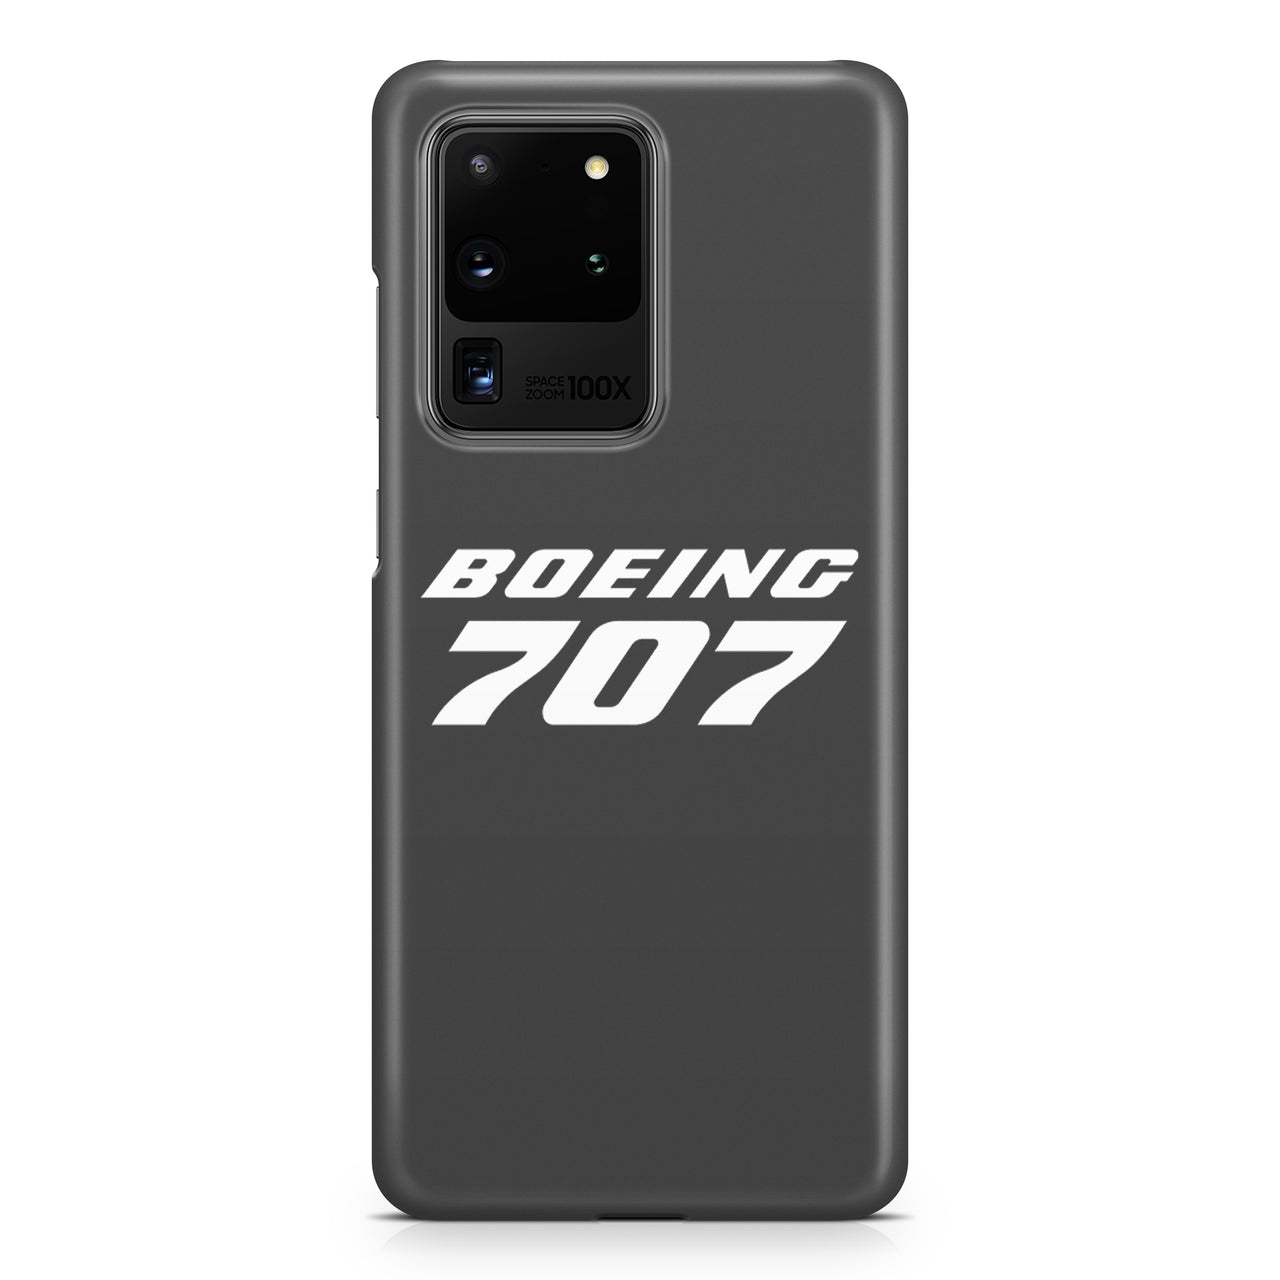 Boeing 707 & Text Samsung A Cases